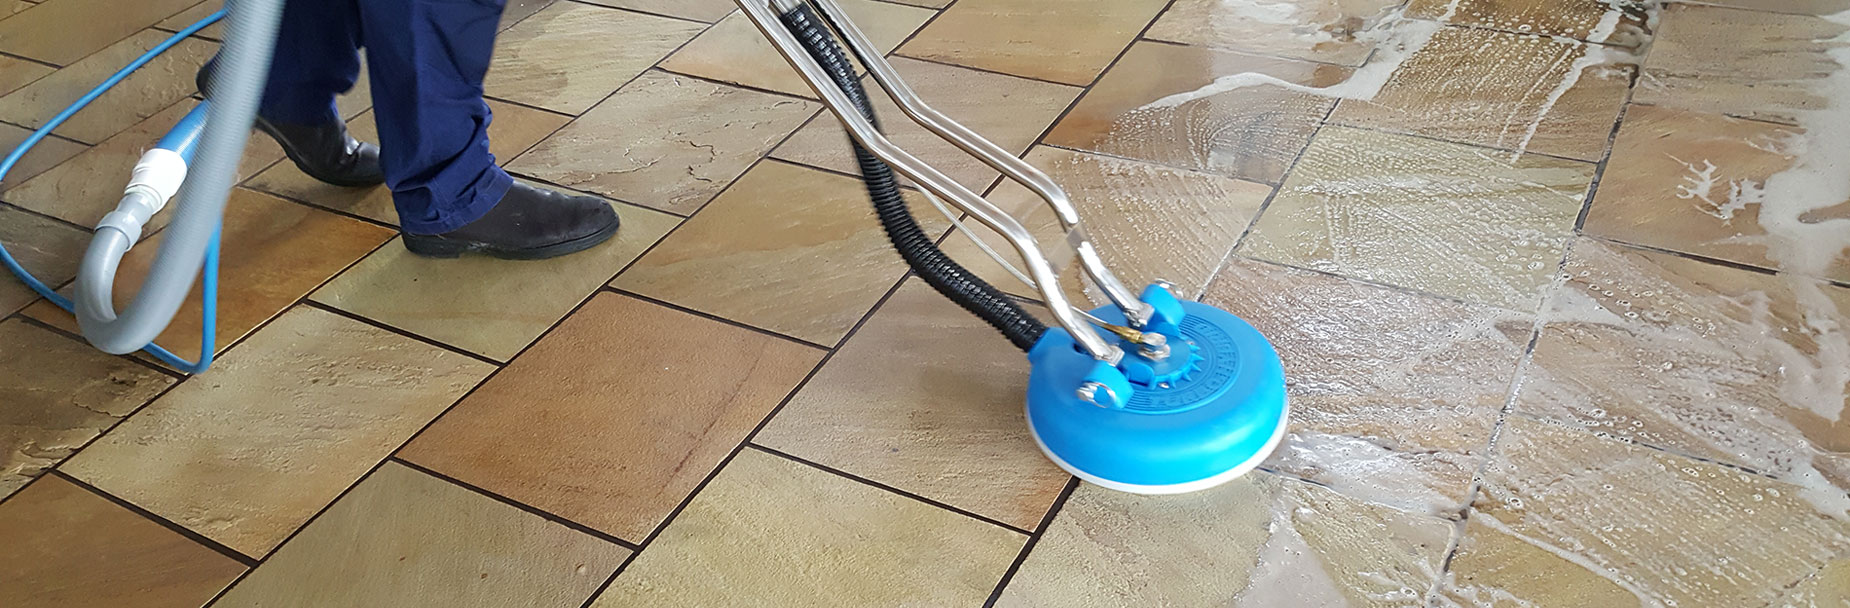 Tile Grout Cleaning Adelaide | Tile and Grout Cleaning Services | Tile